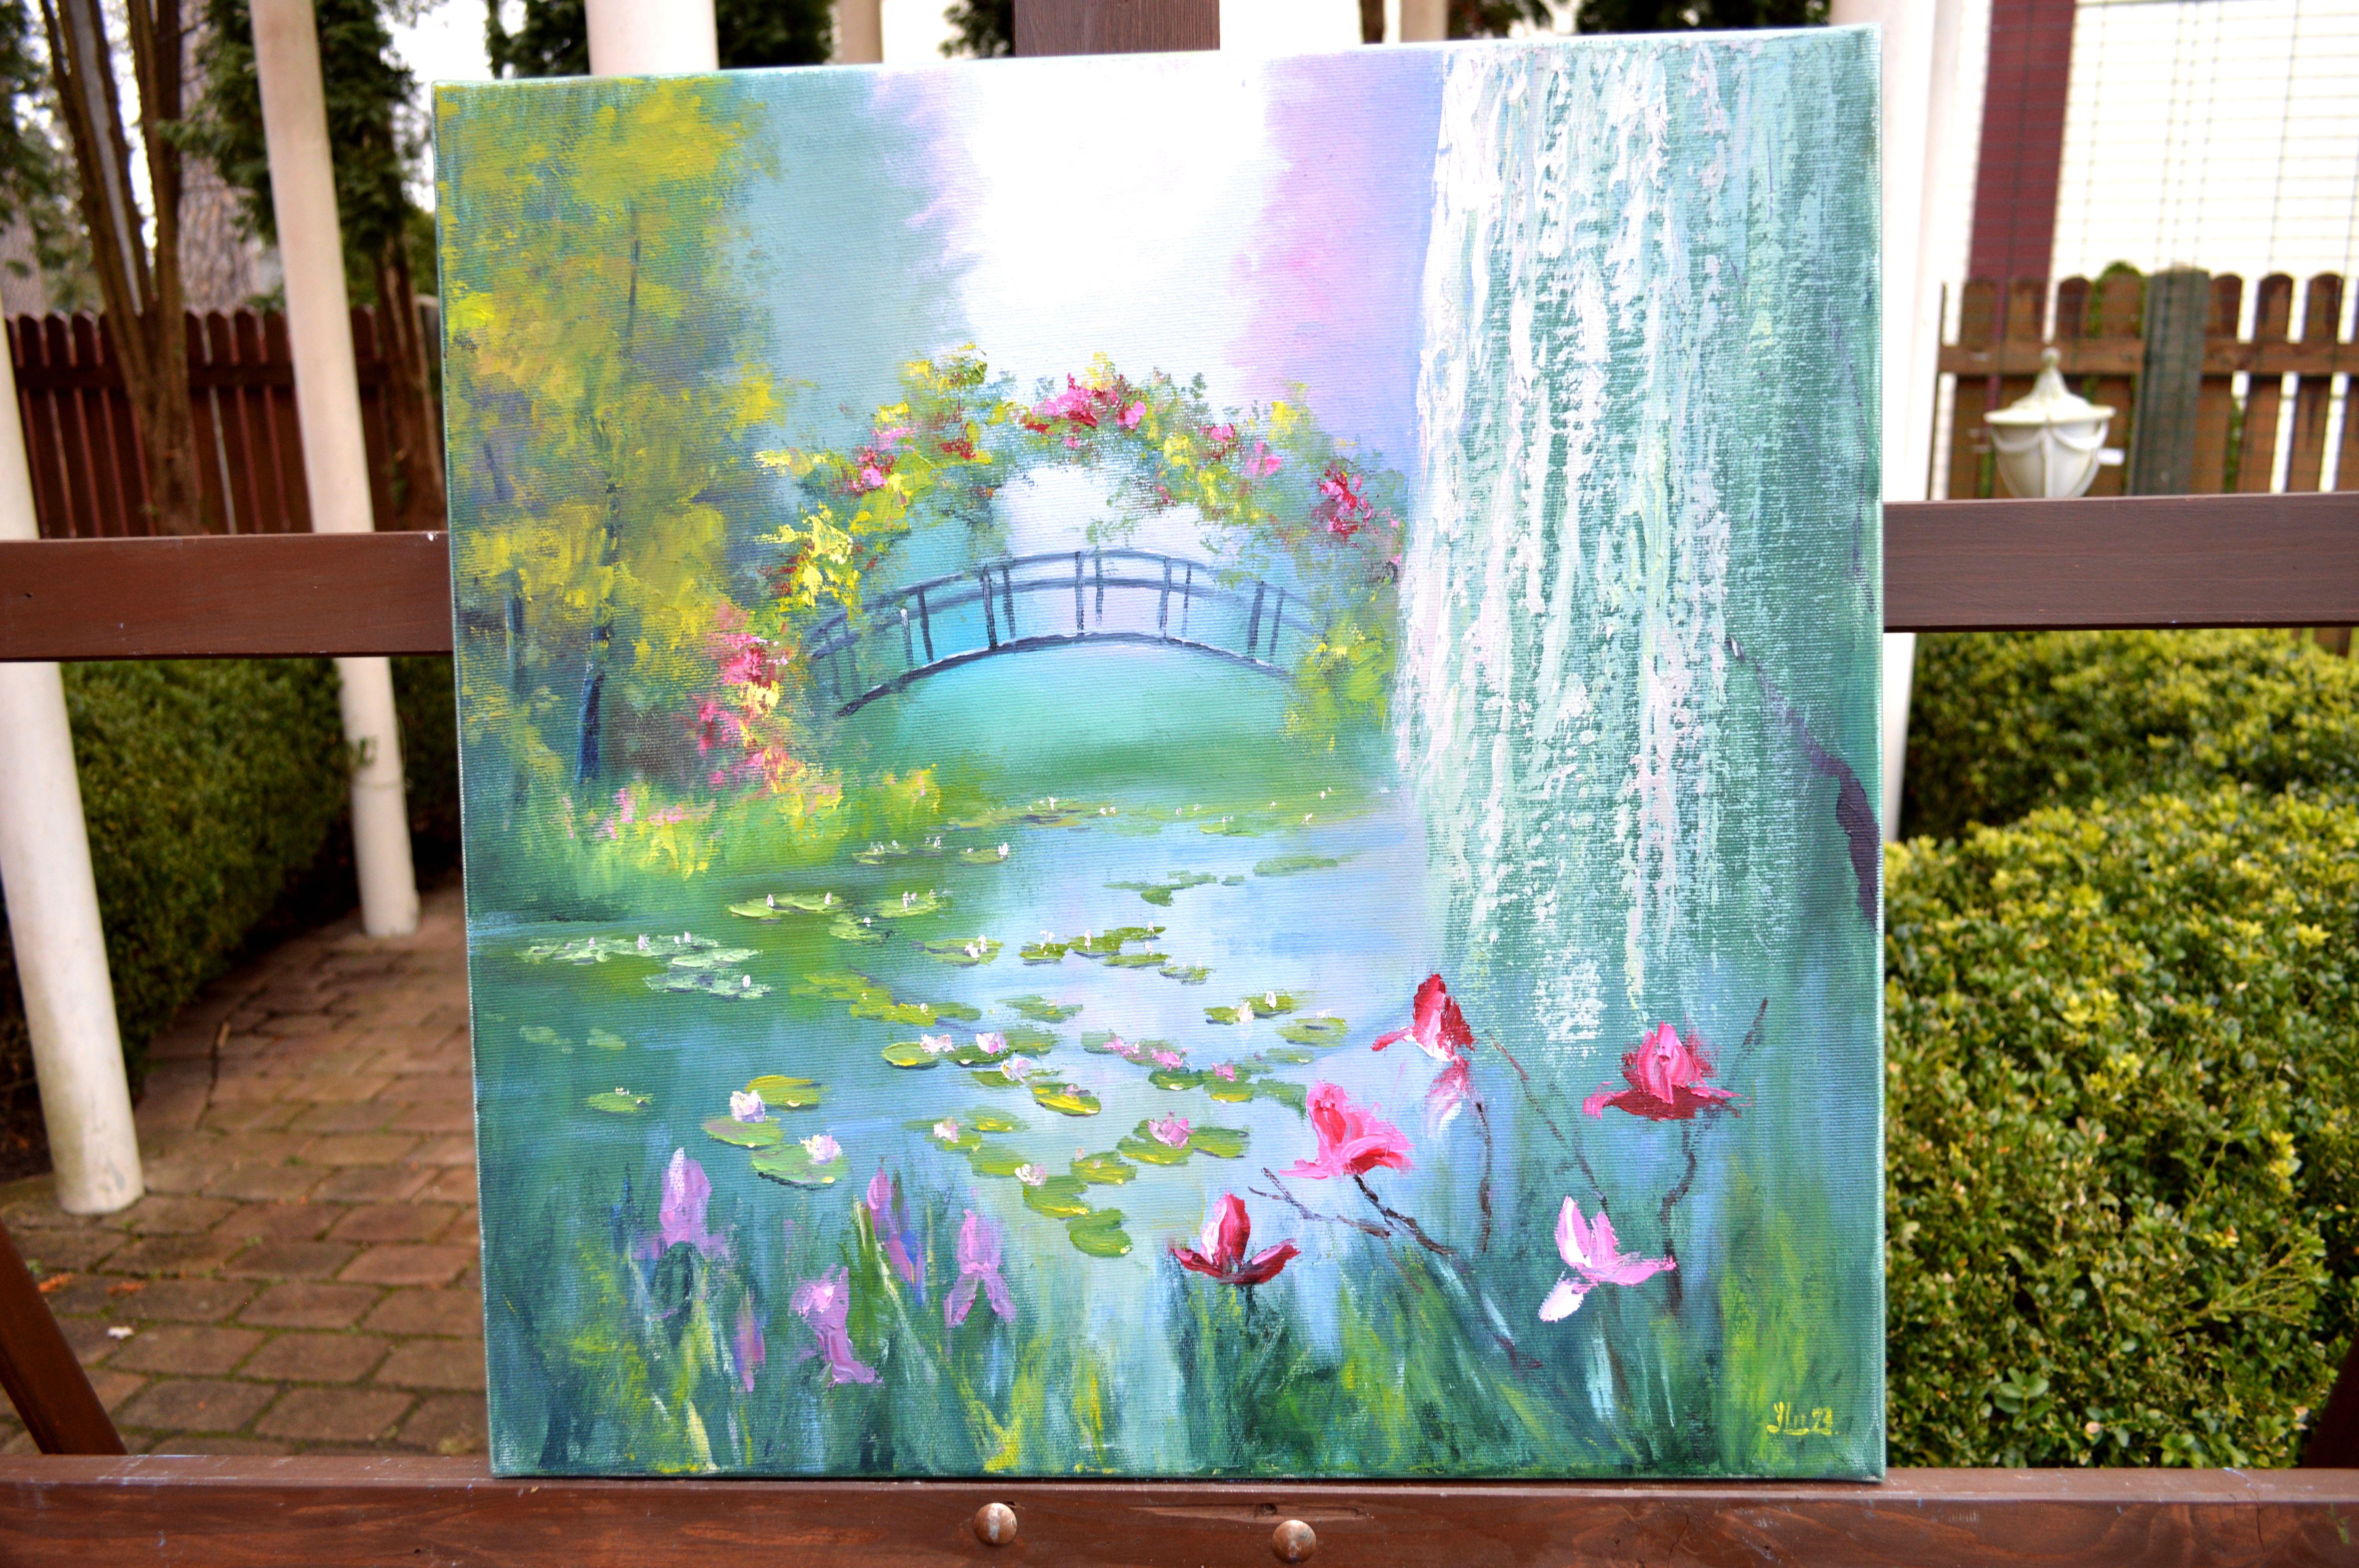 In this vibrant oil painting, I've poured my zest for nature and renewal. Brushstrokes blossom across the canvas, capturing the essence of a serene pond, where time seems suspended. The arched bridge and flourishing flora speak of harmony and